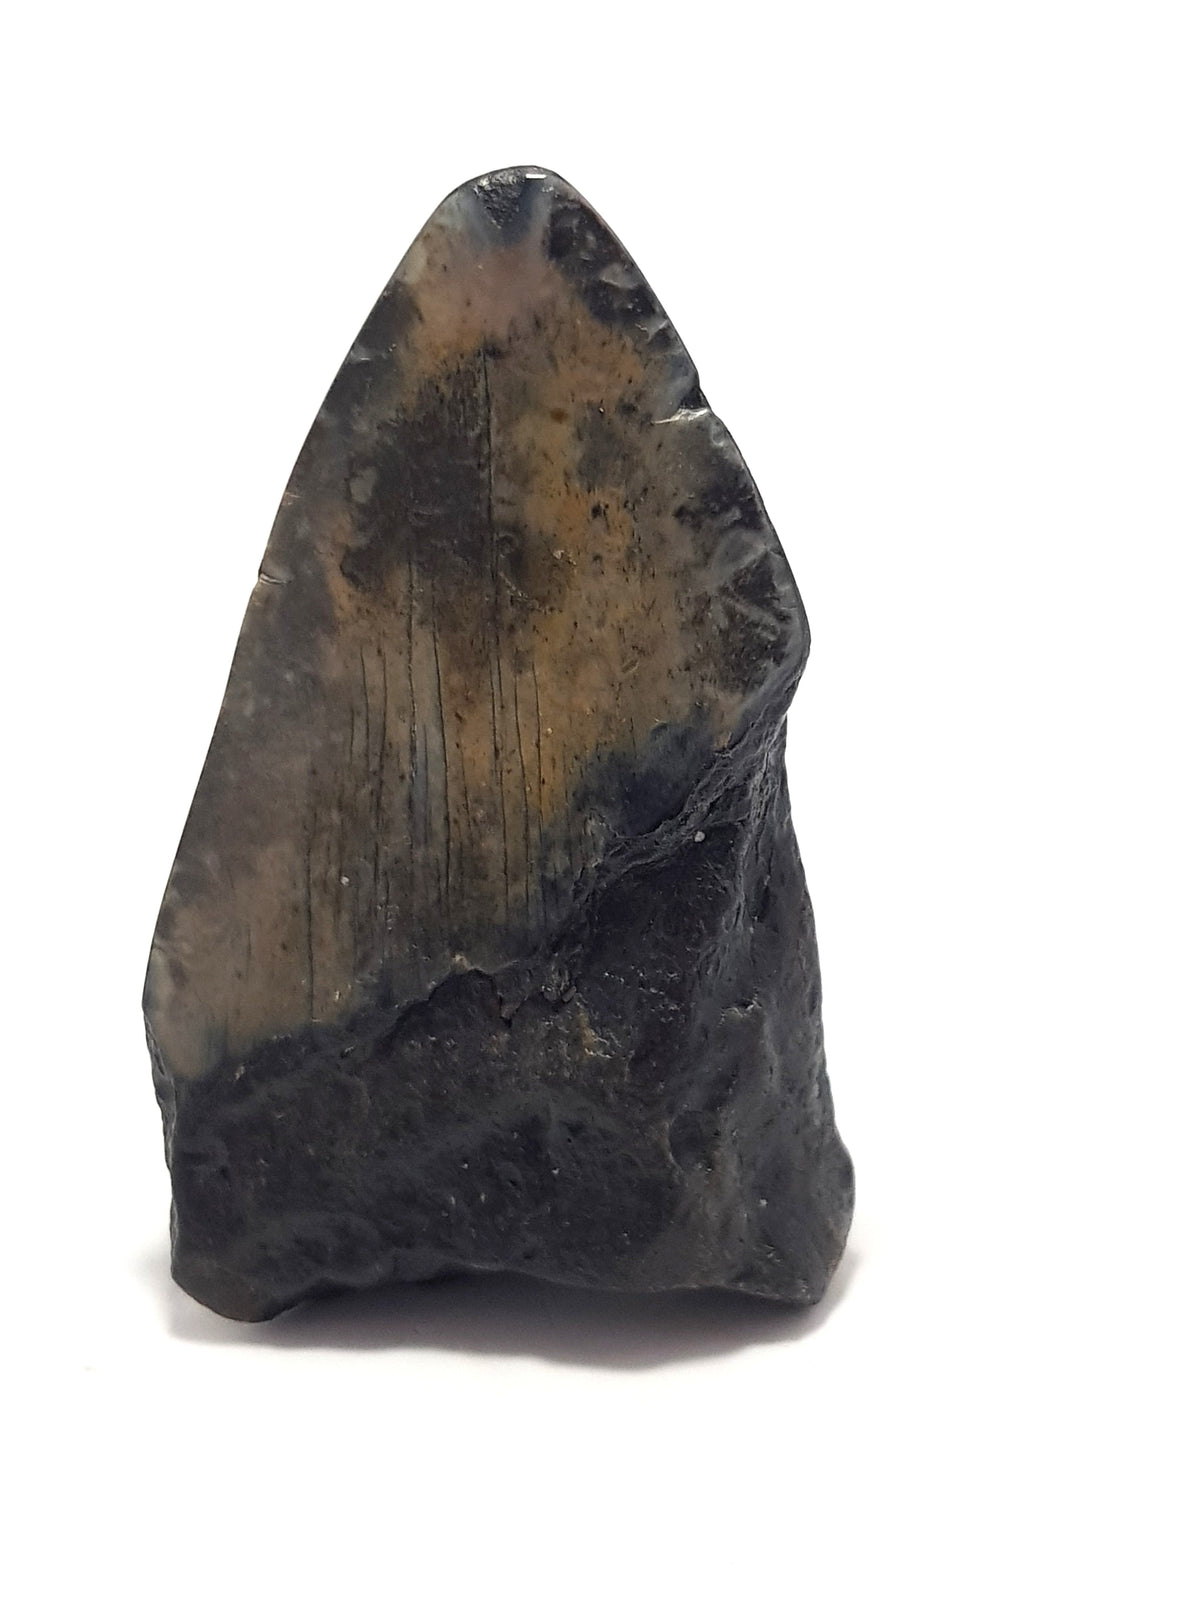 partial megaladon tooth, seen from the back. the enamel is grey brown, the root material is black. the bottom left corner or the root is missing.